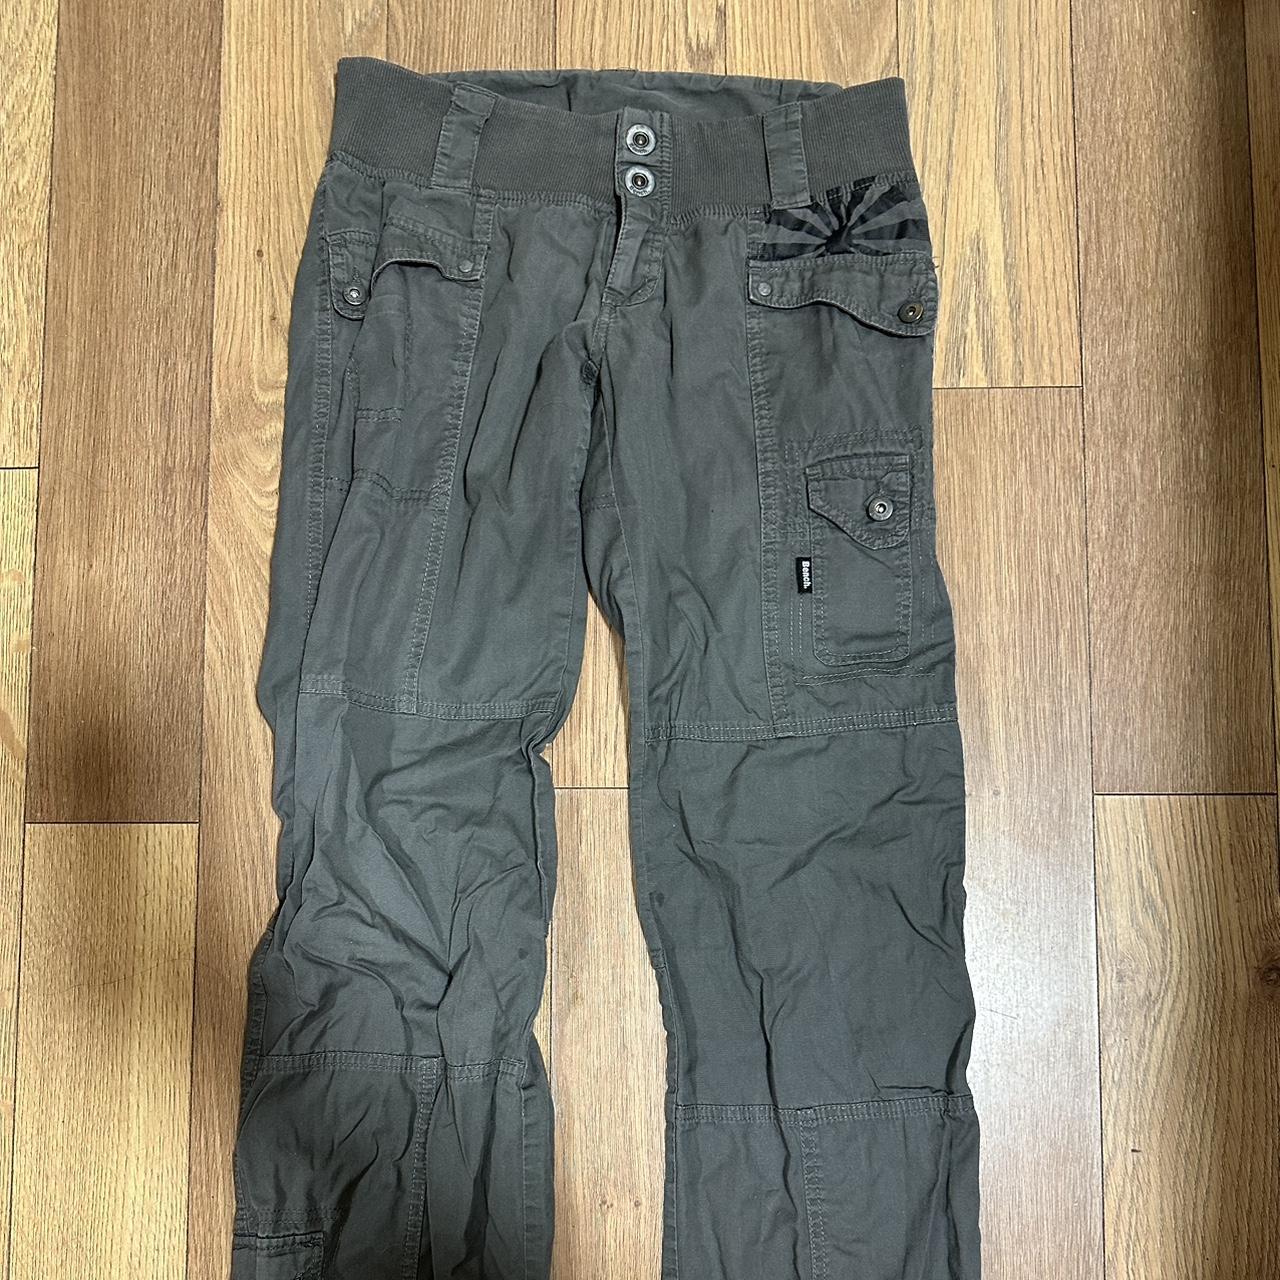 Insane 2000s low waisted bench cargo pants... - Depop